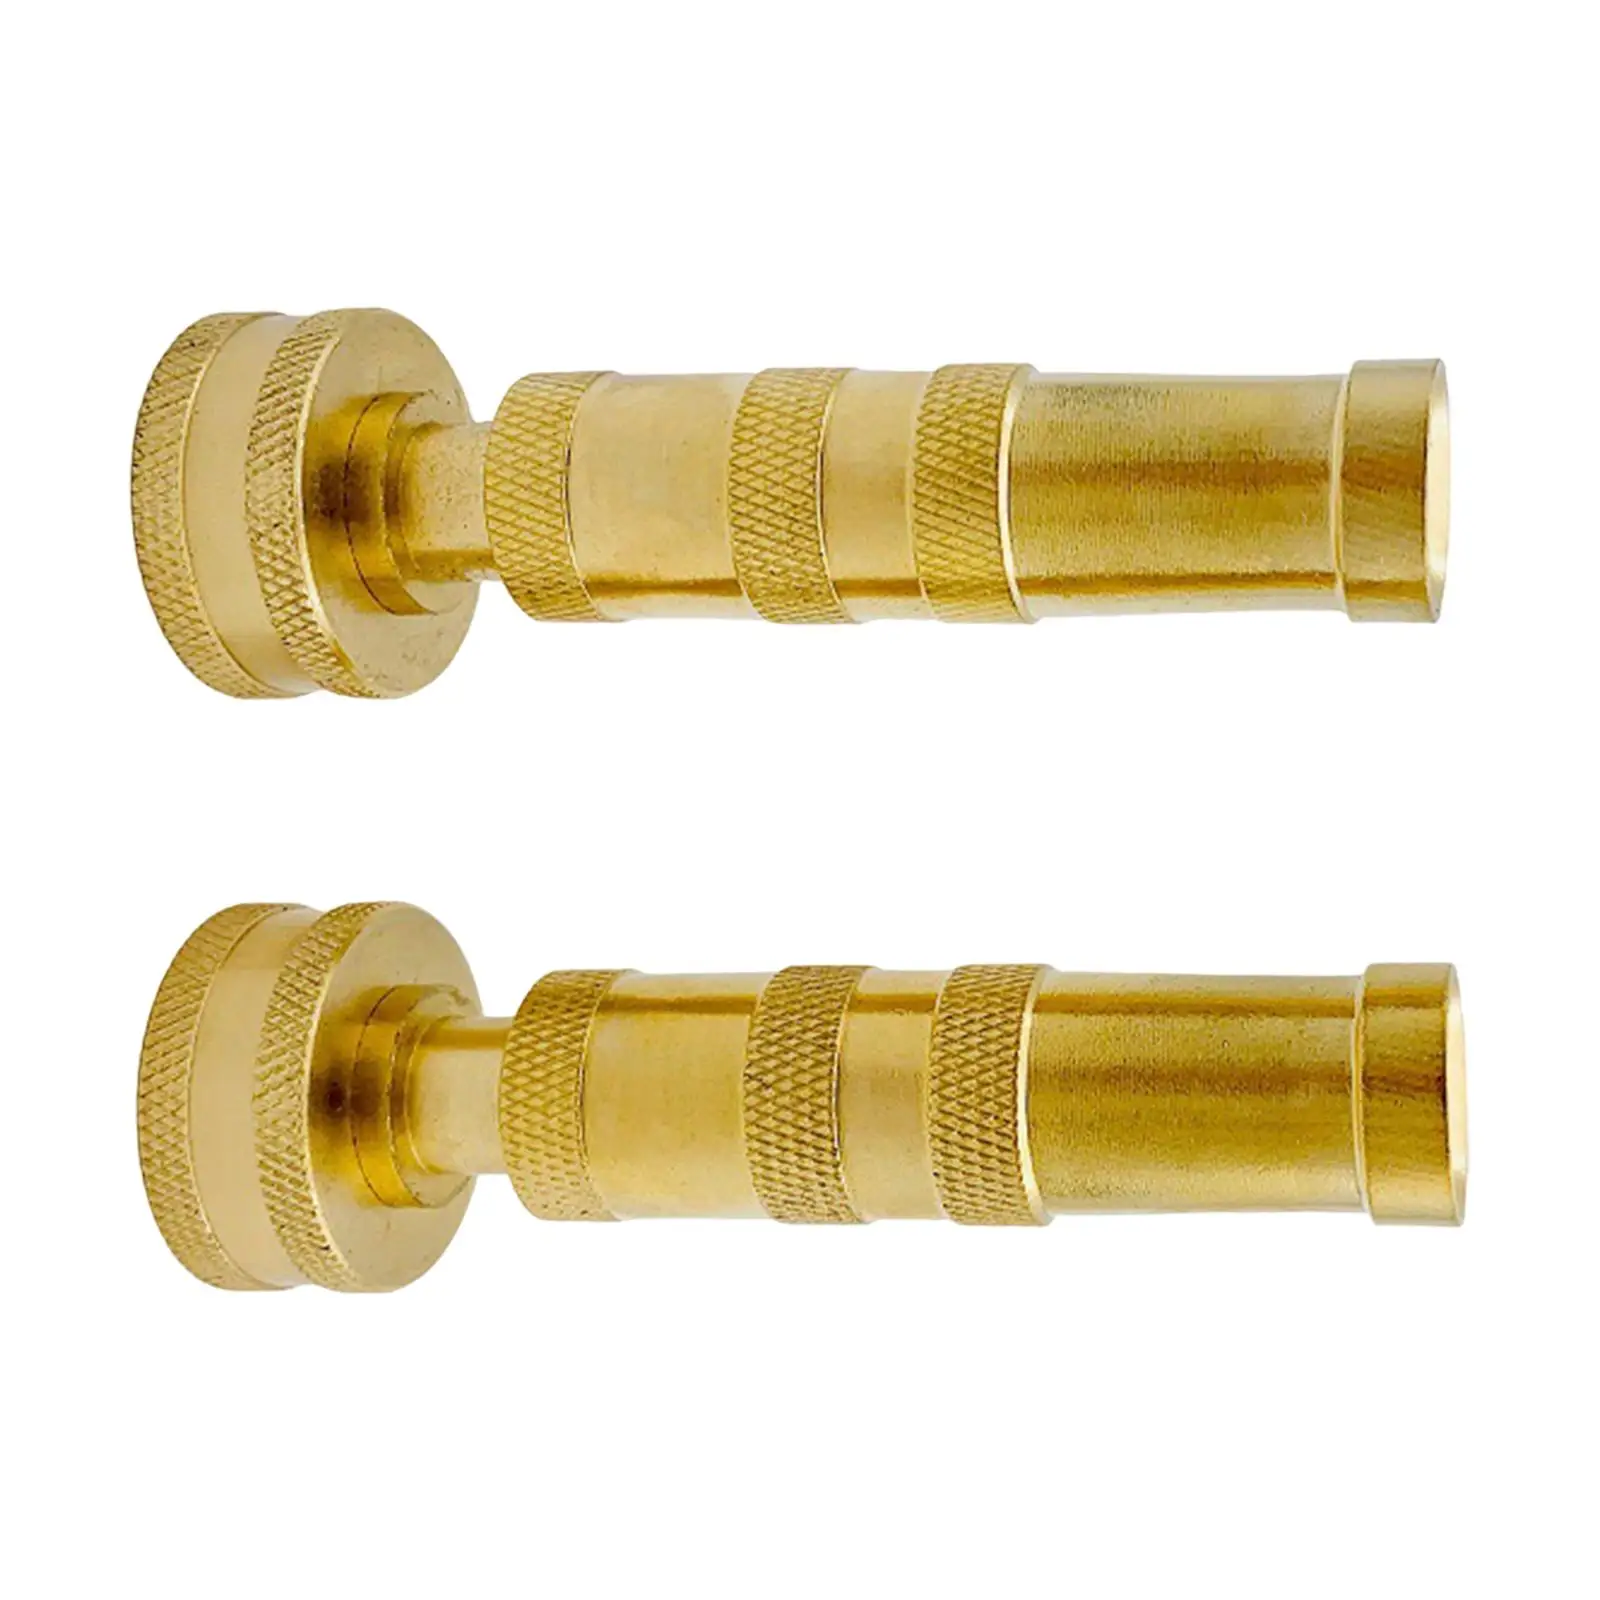 2 Pieces Brass Hose Nozzles Multipurpose 1/2`` Thread Inlet High Pressure Hose Nozzles for Driveway Plant Furniture Siding Lawn